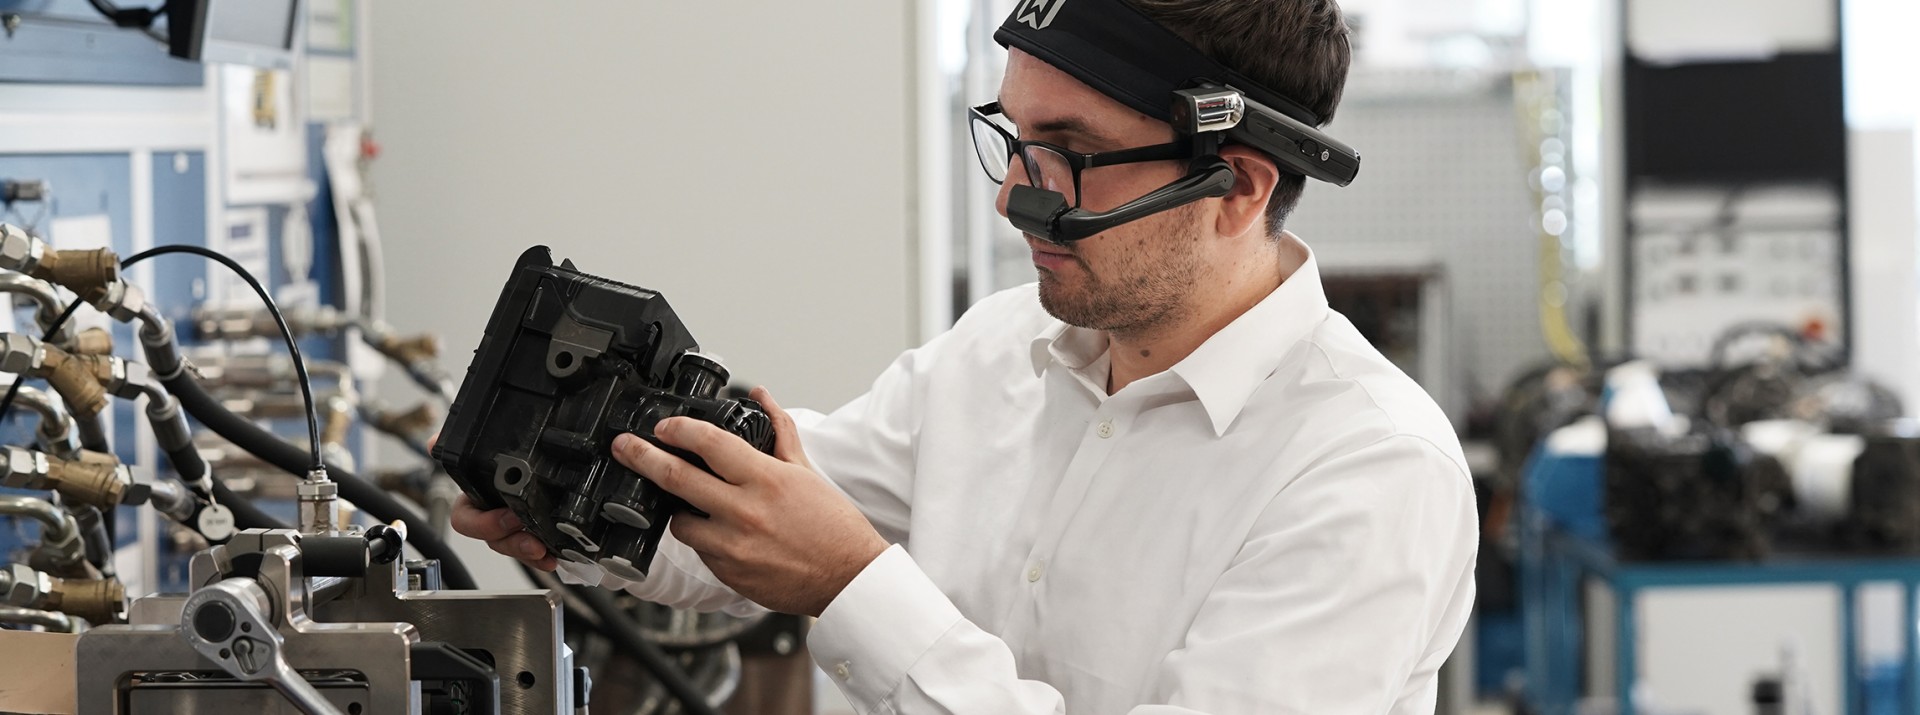 A Knorr-Bremse employee looks at a technical product through AR glasses.